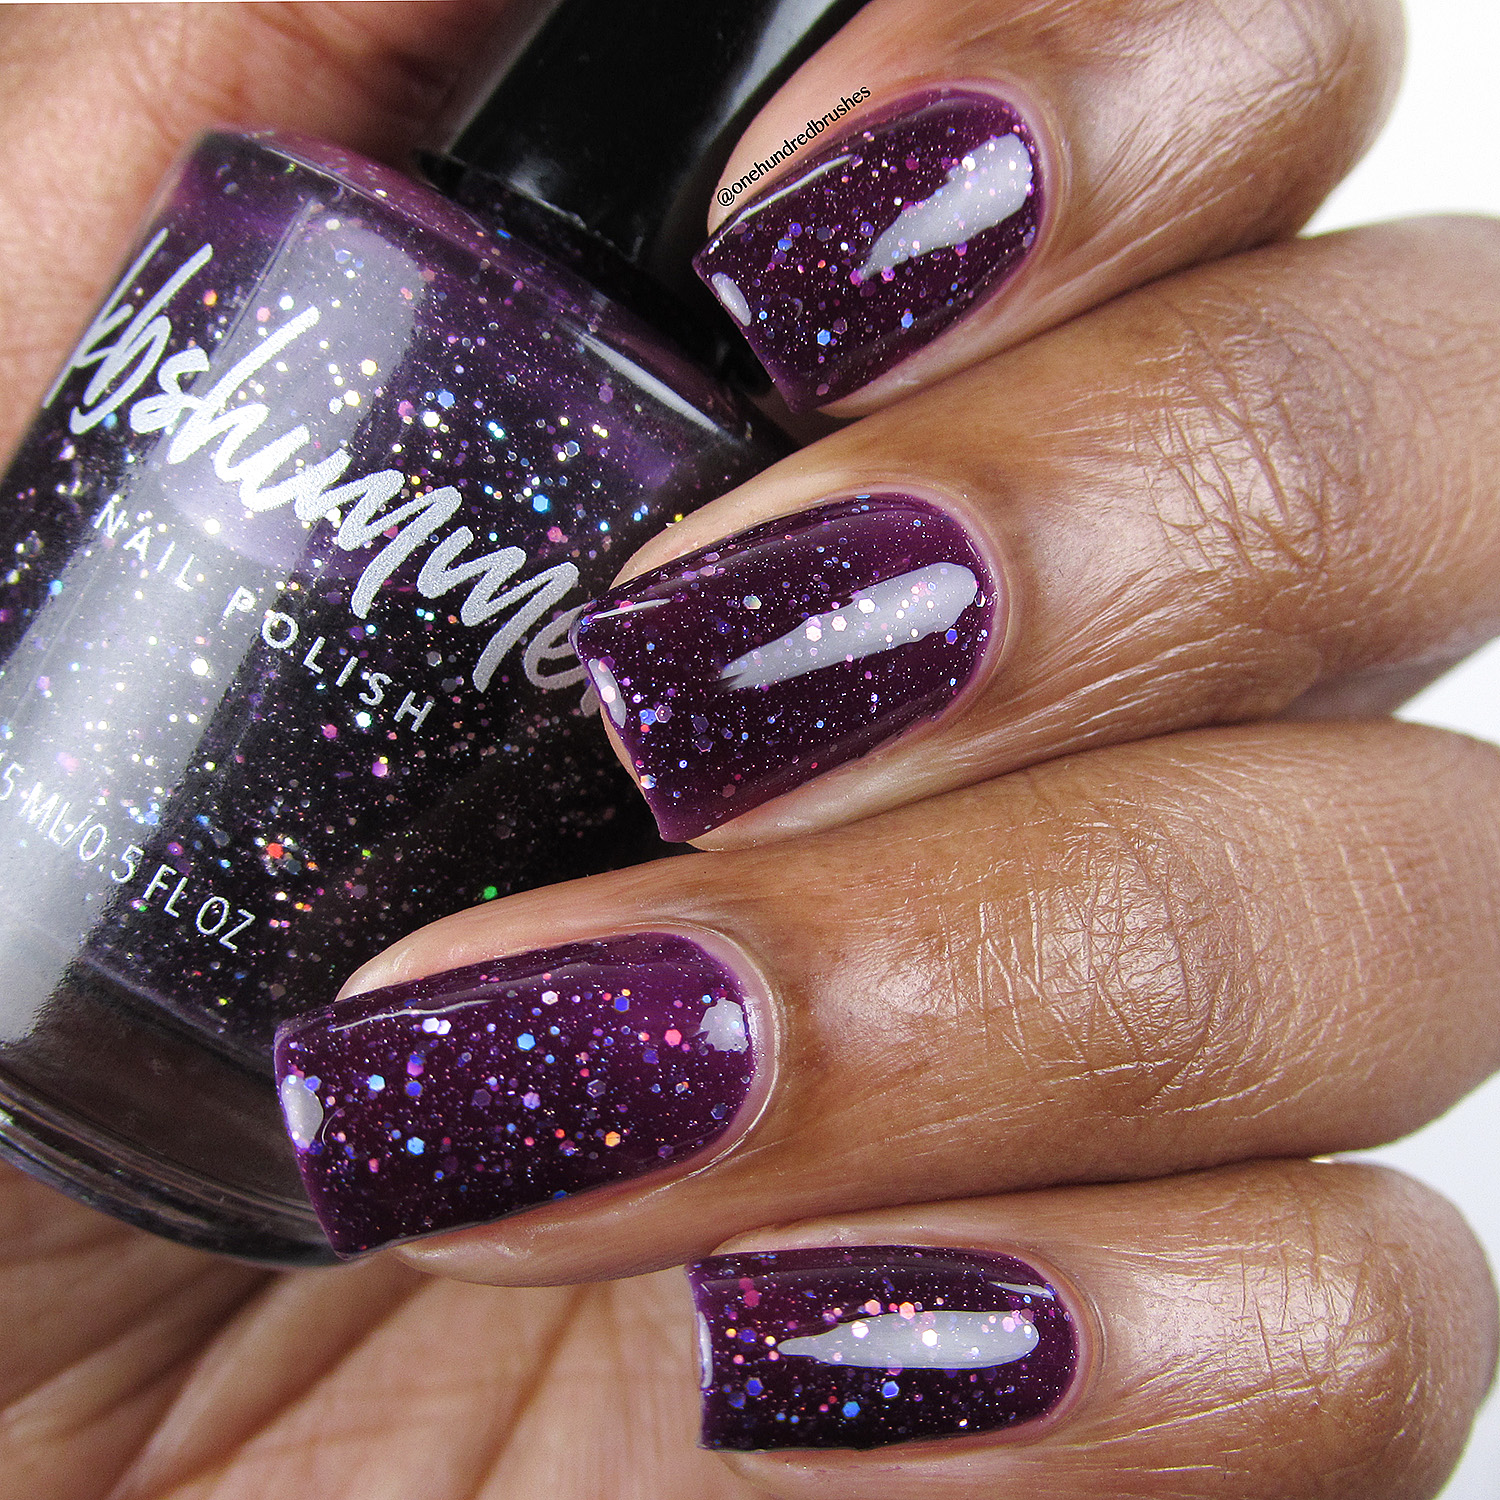 Kbshimmer Witch Way Jelly Glitter Nail Polish